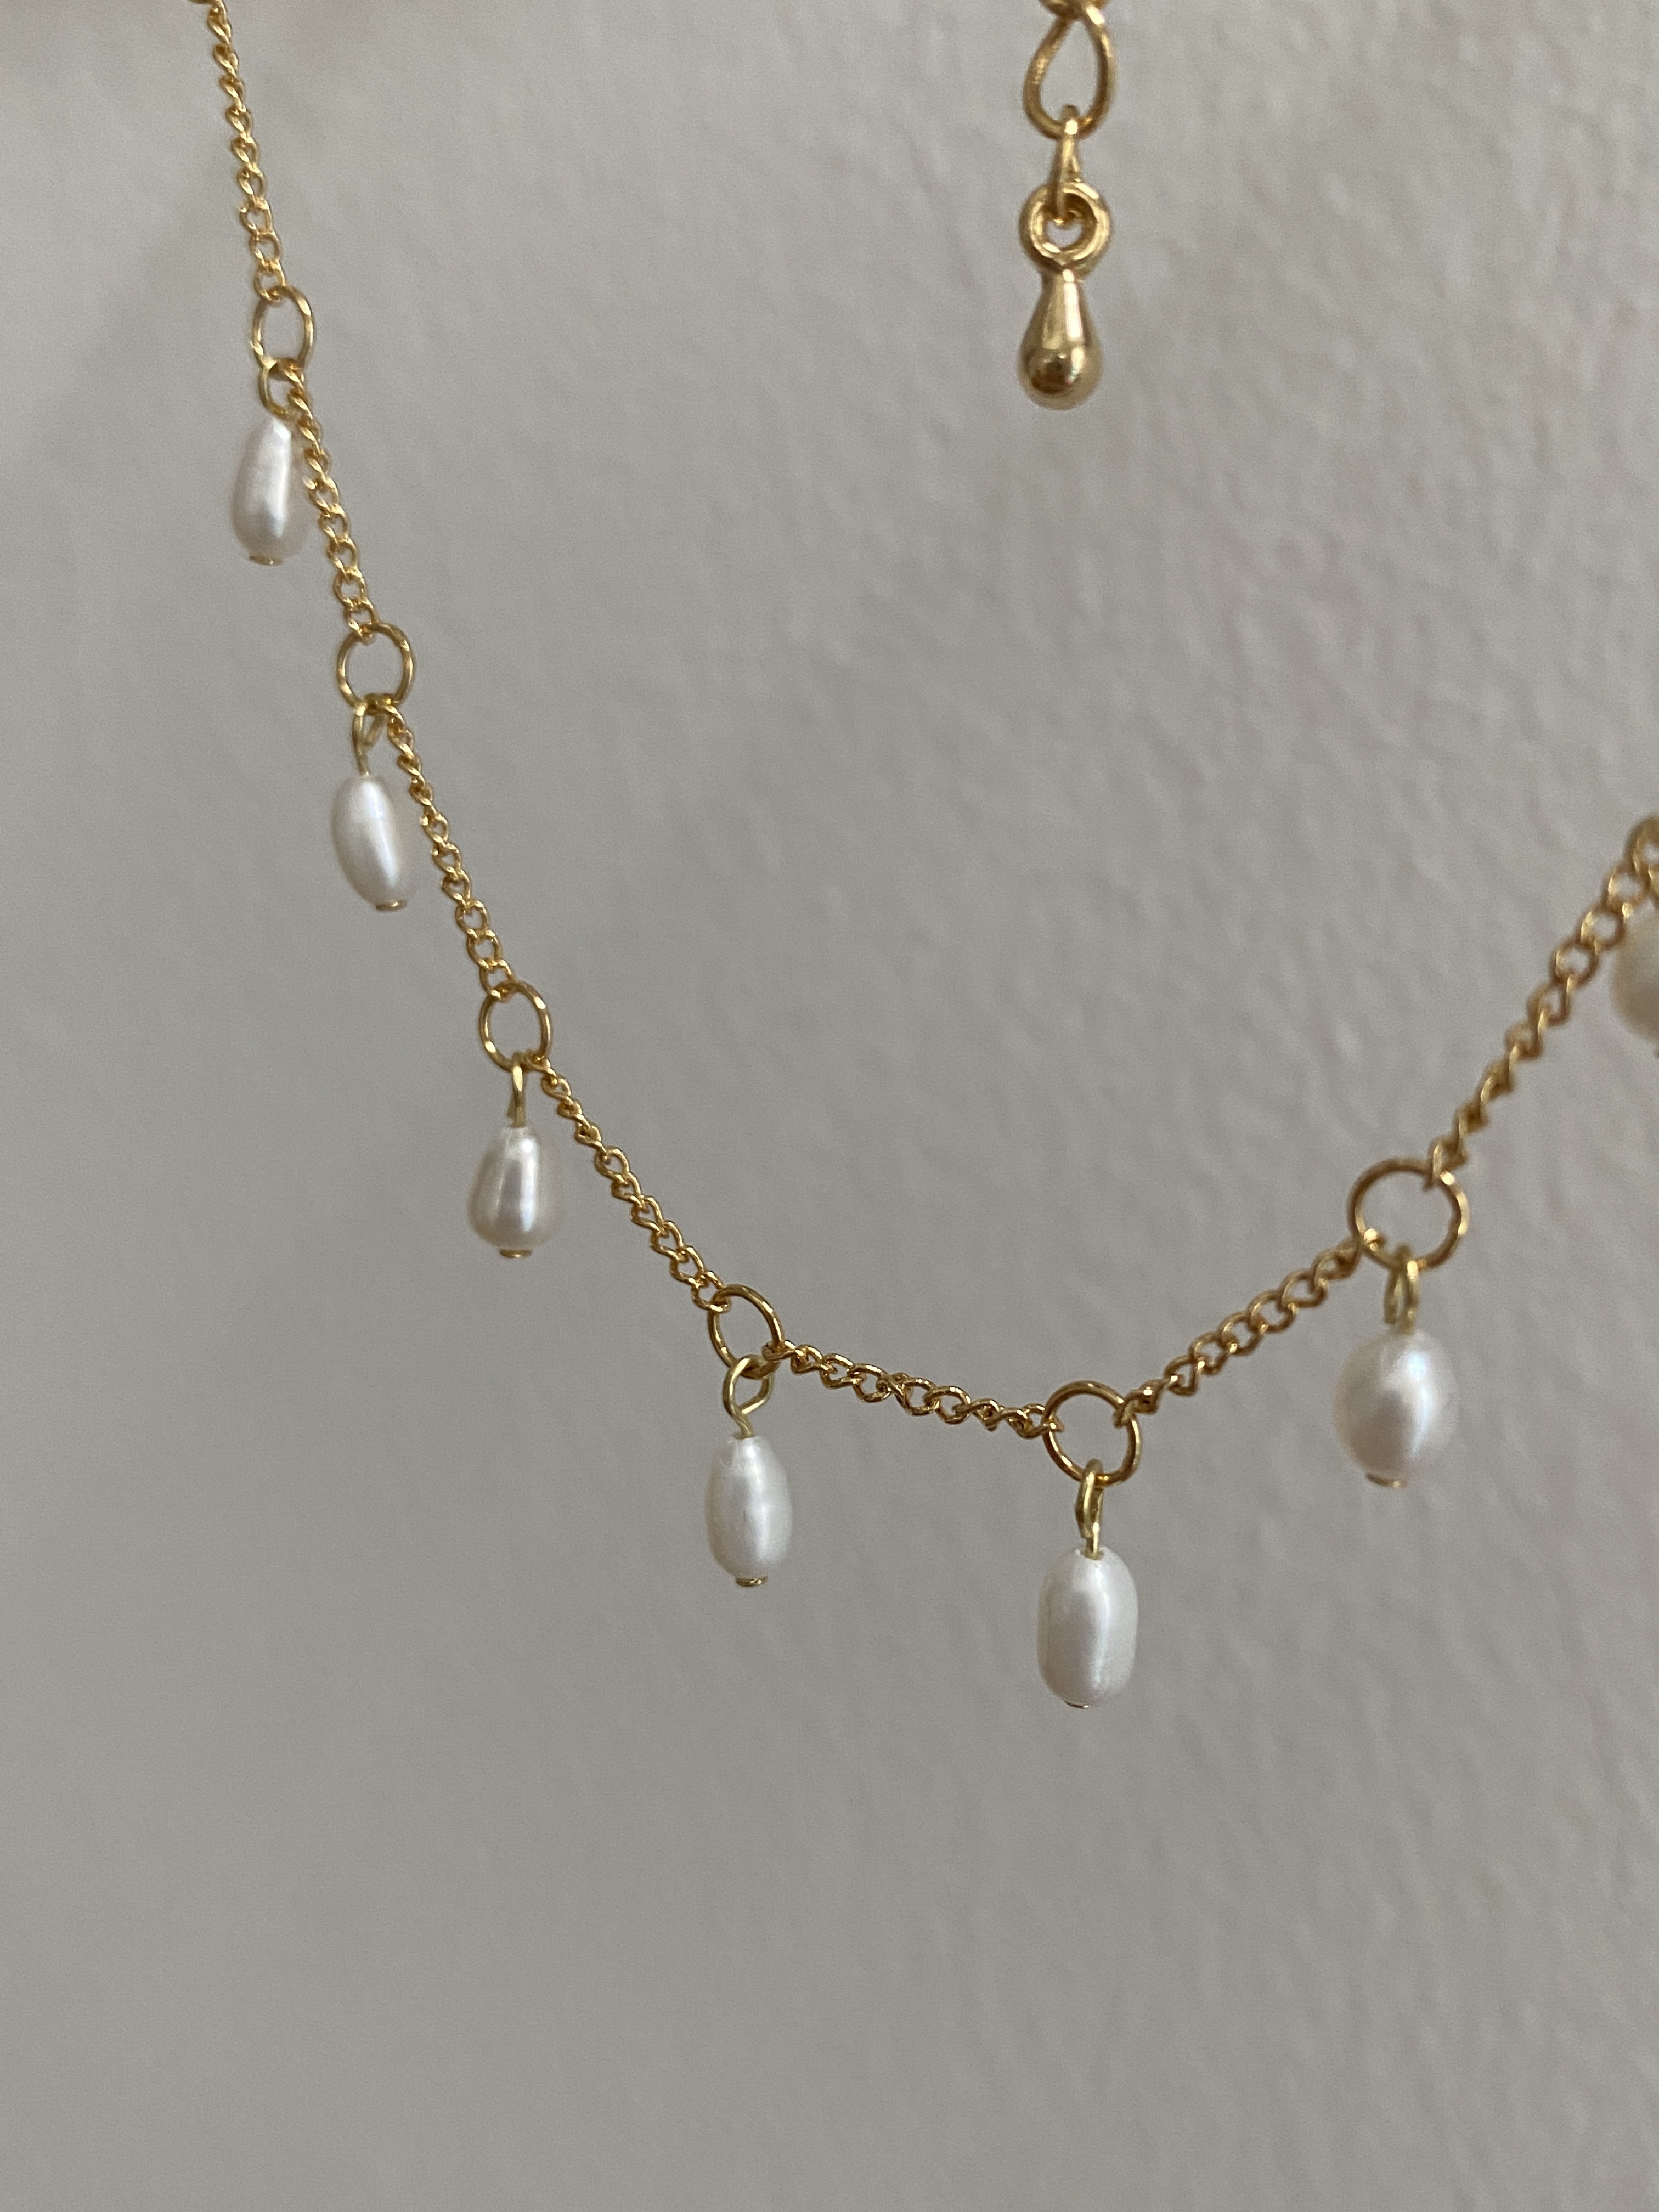 Gold, dangling rice shape freshwater pearls necklace